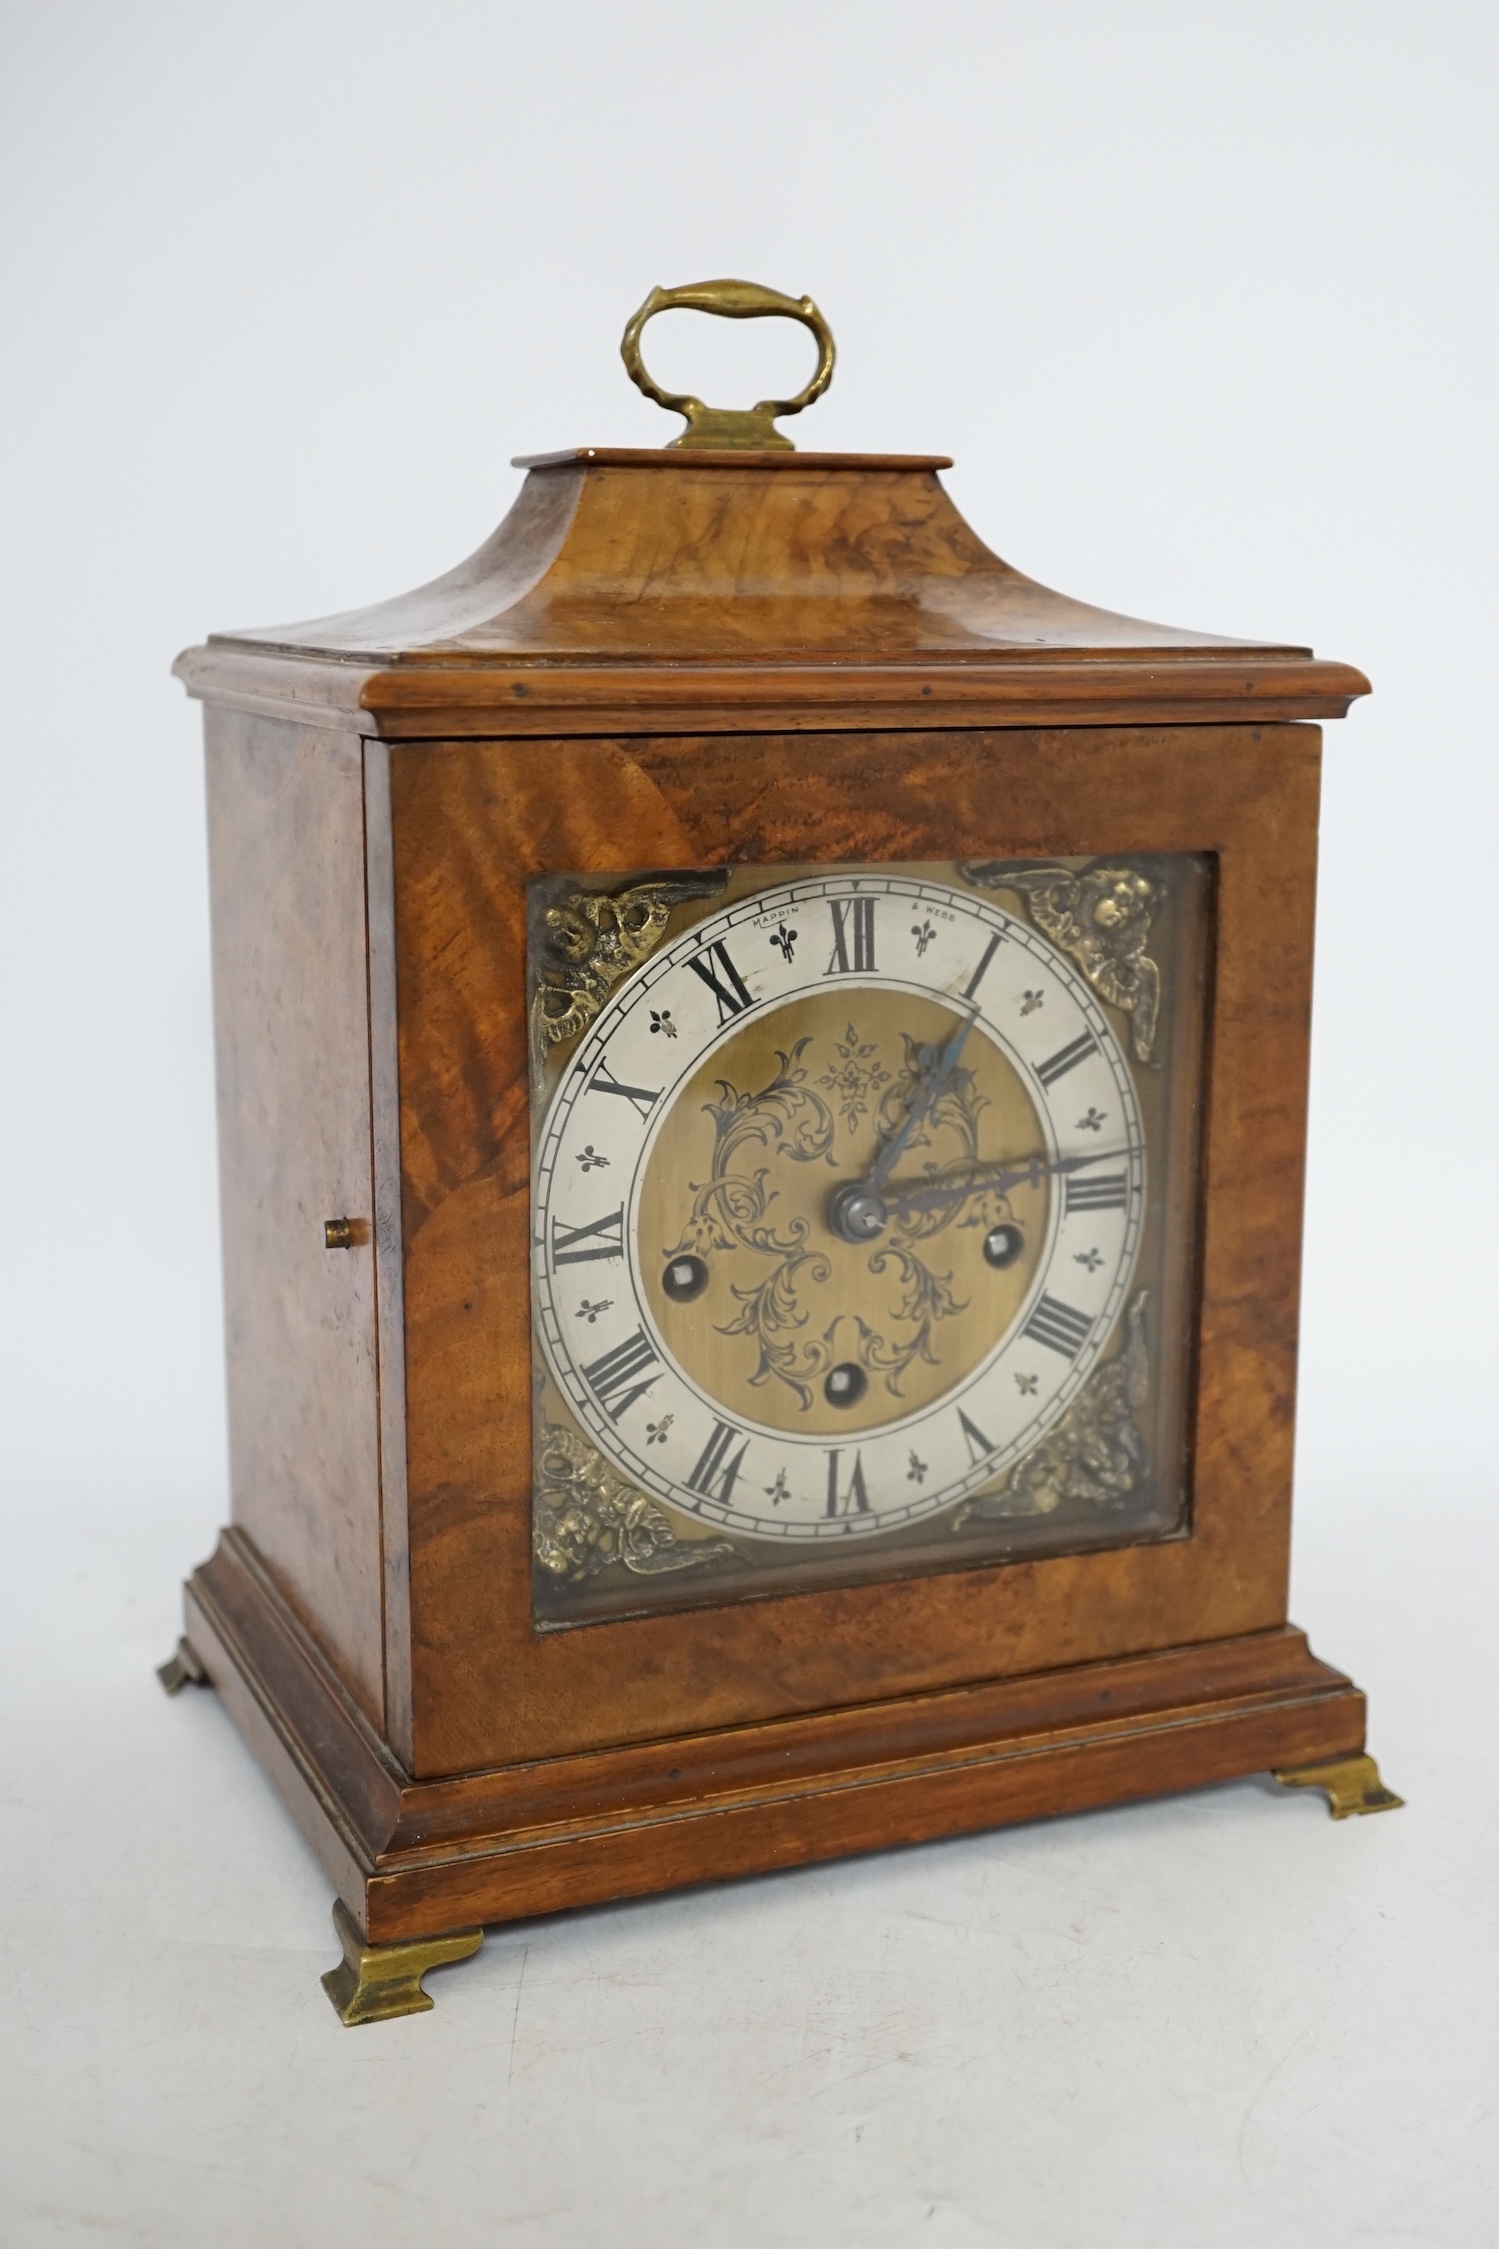 A Mappin & Webb walnut mantel clock, with key, 28.5cm high. Condition - case good, not tested